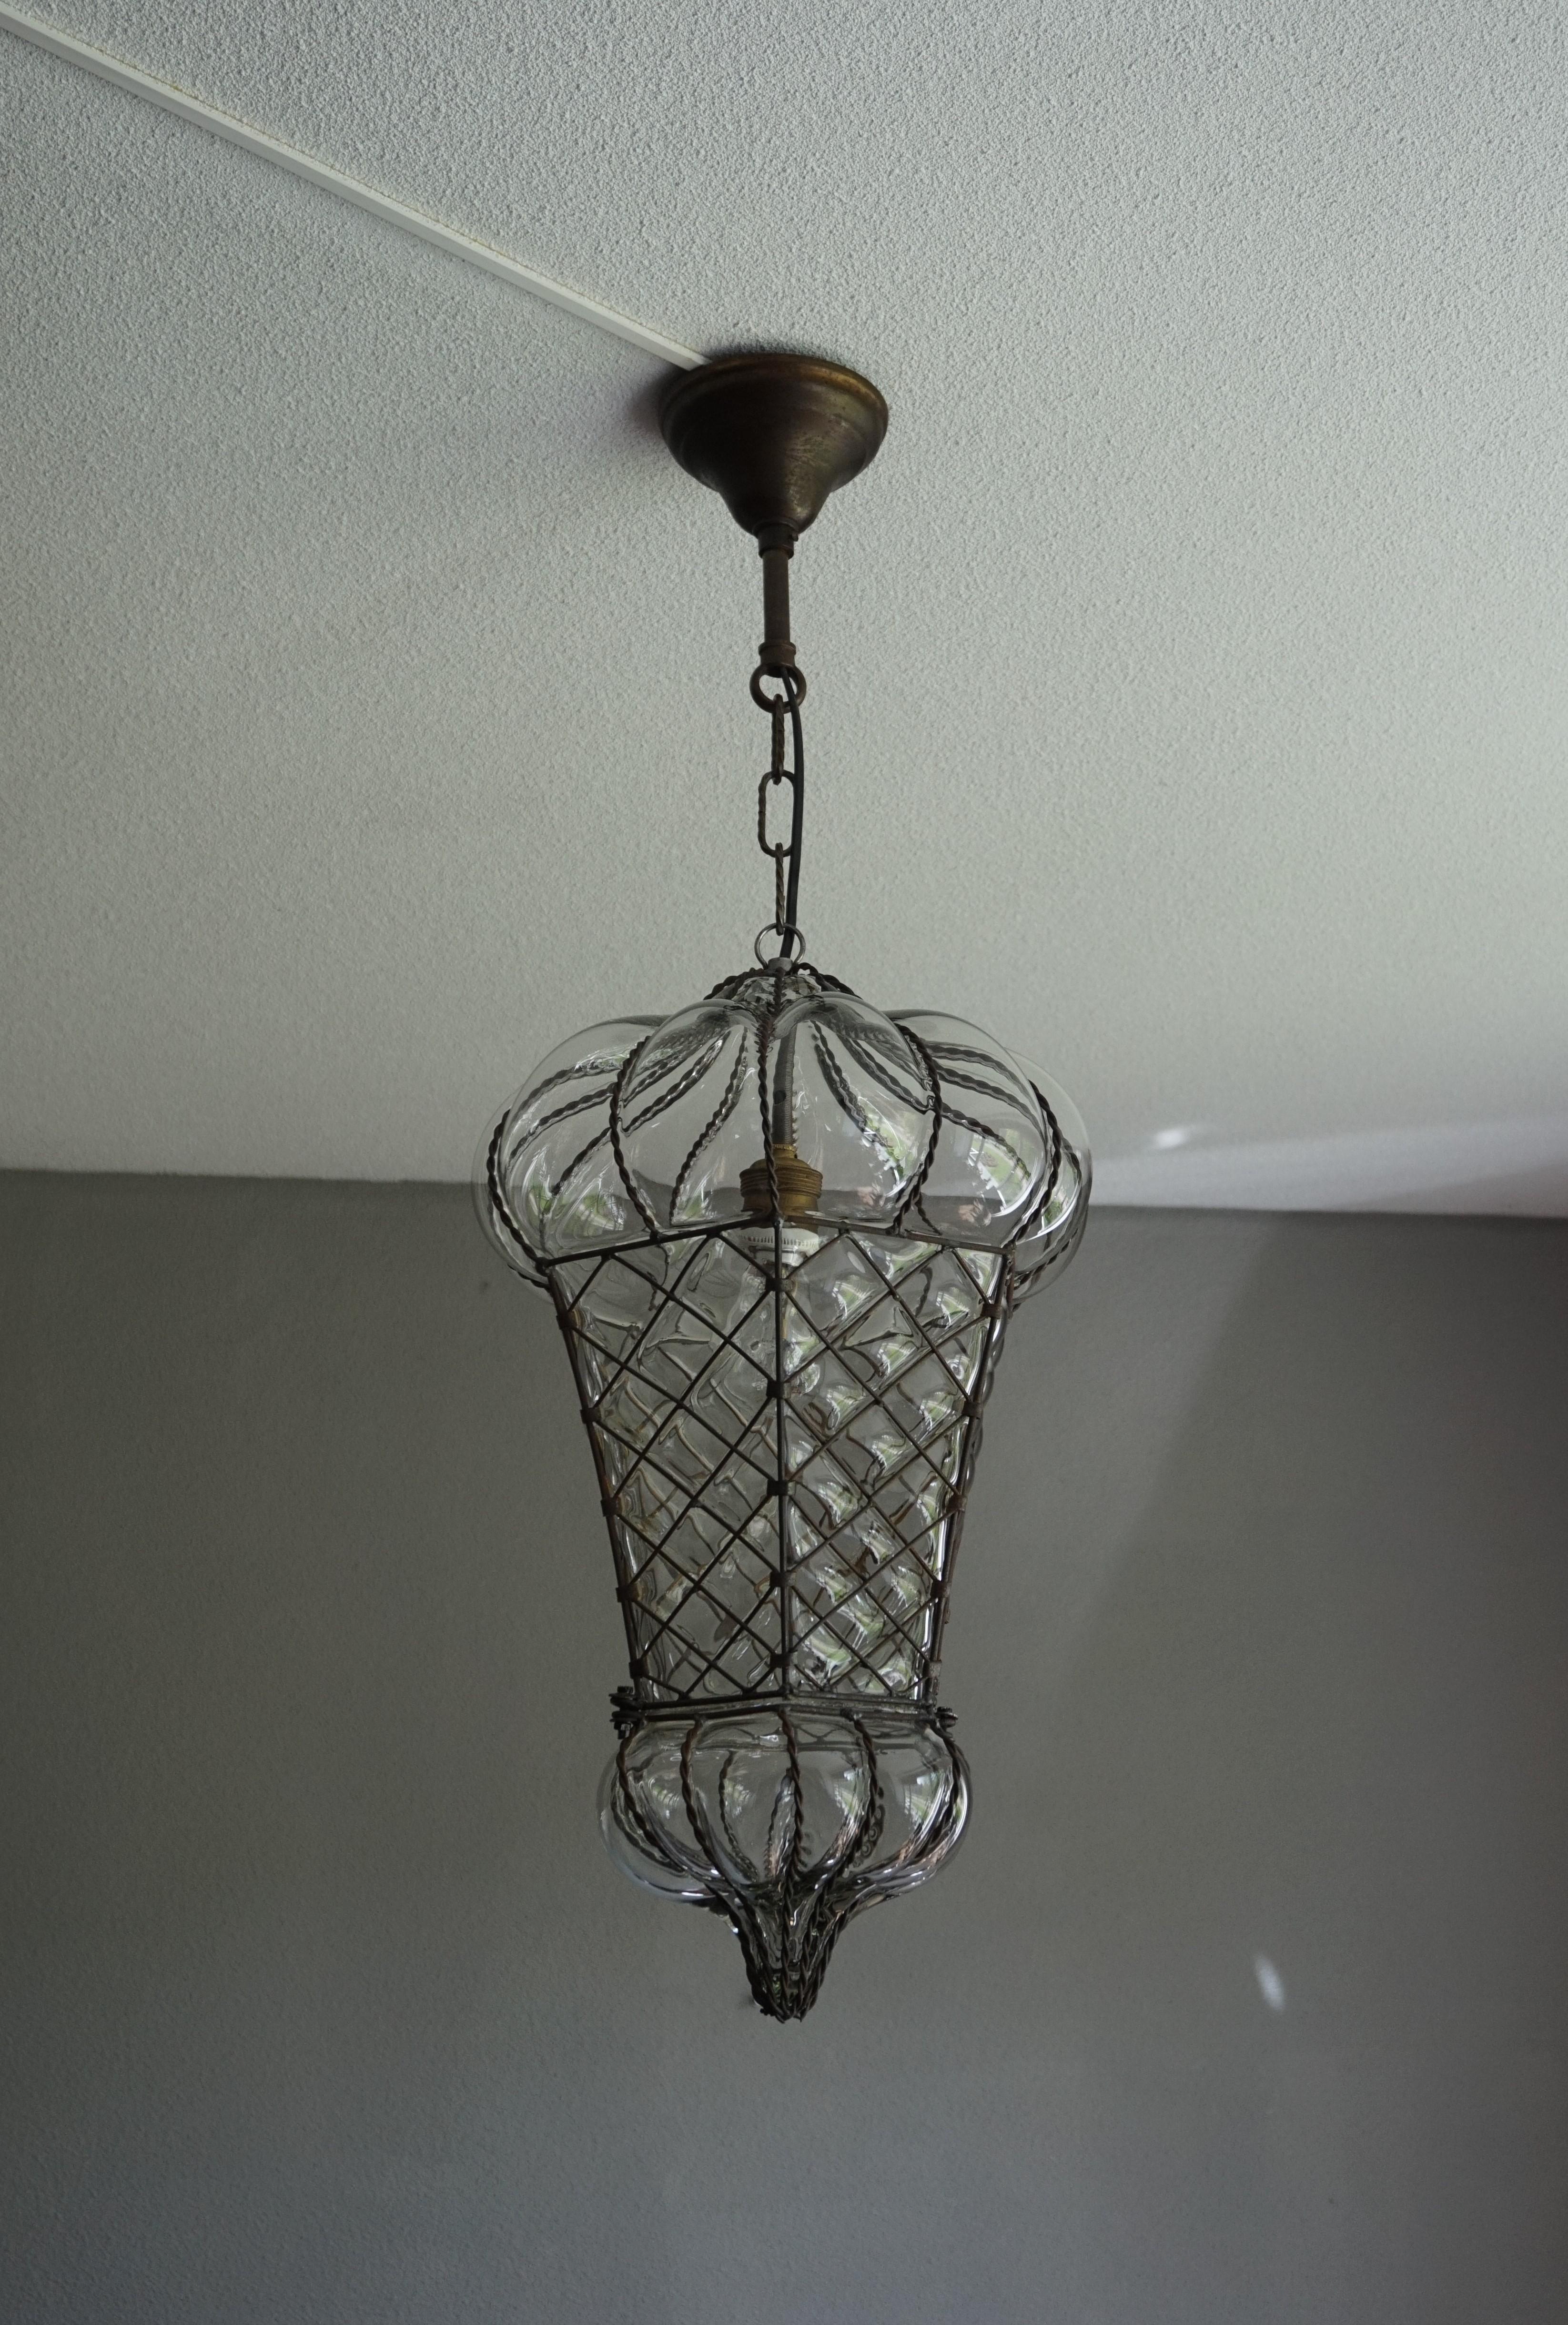 Italian Antique Large and Rare Venetian Mouth Blown Glass in Metal Frame Pendant Light